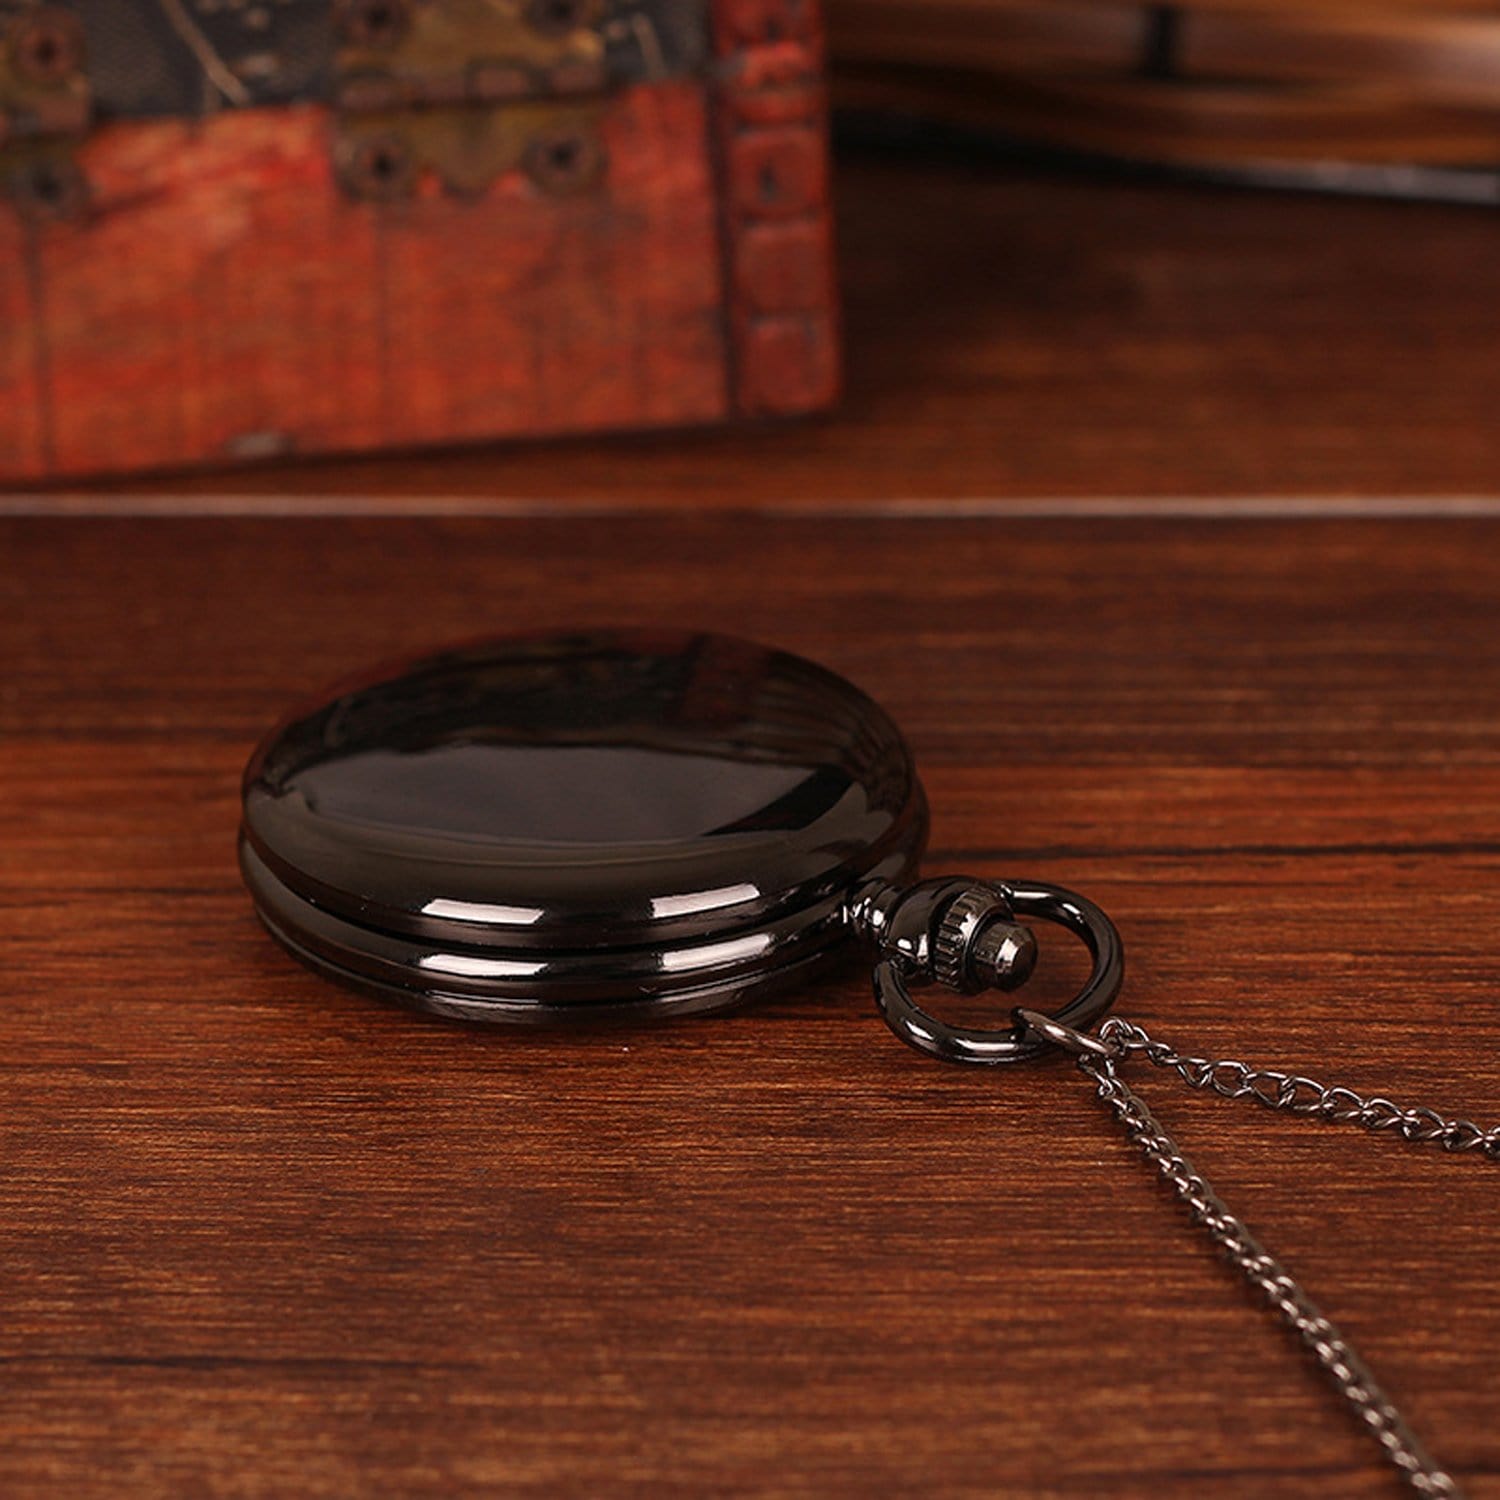 Pocket Watches To My Husband - The Best Part Is That You And Me Pocket Watch GiveMe-Gifts